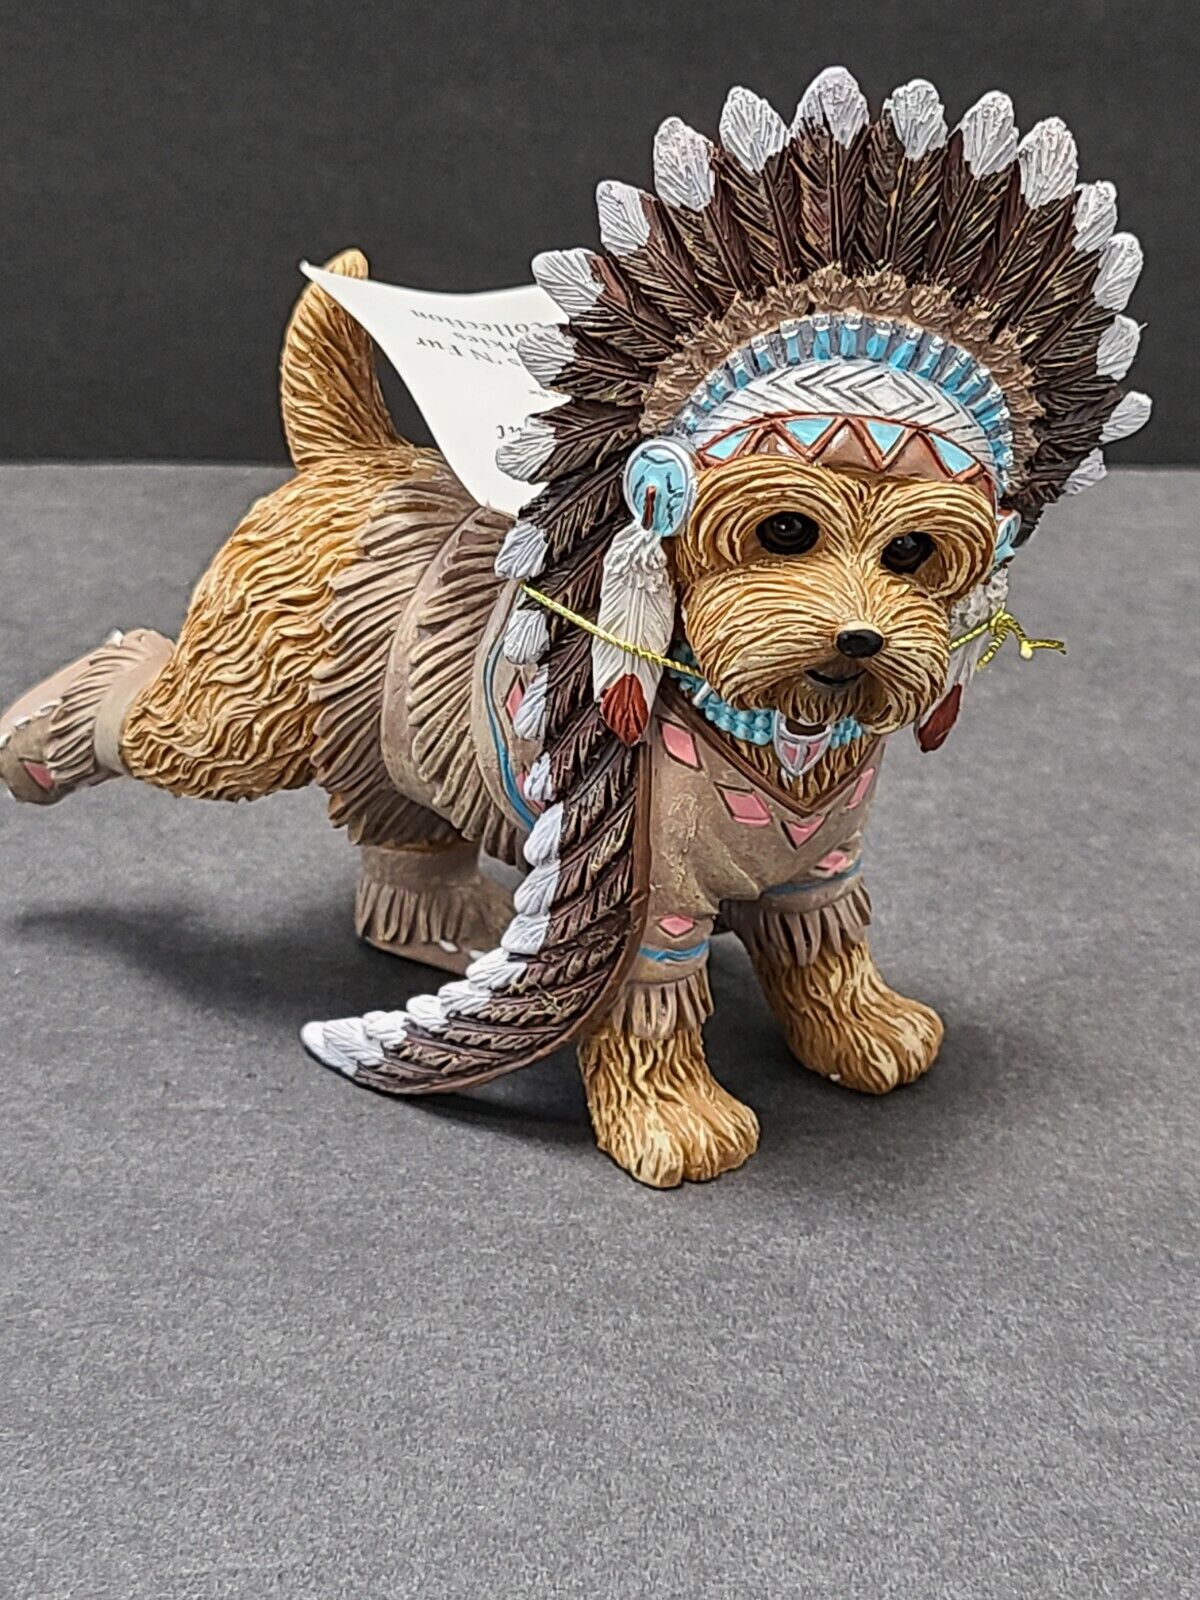 Hamilton Collection “Chief Kicking Cat” Feathers 'N Fur Yorkies collection